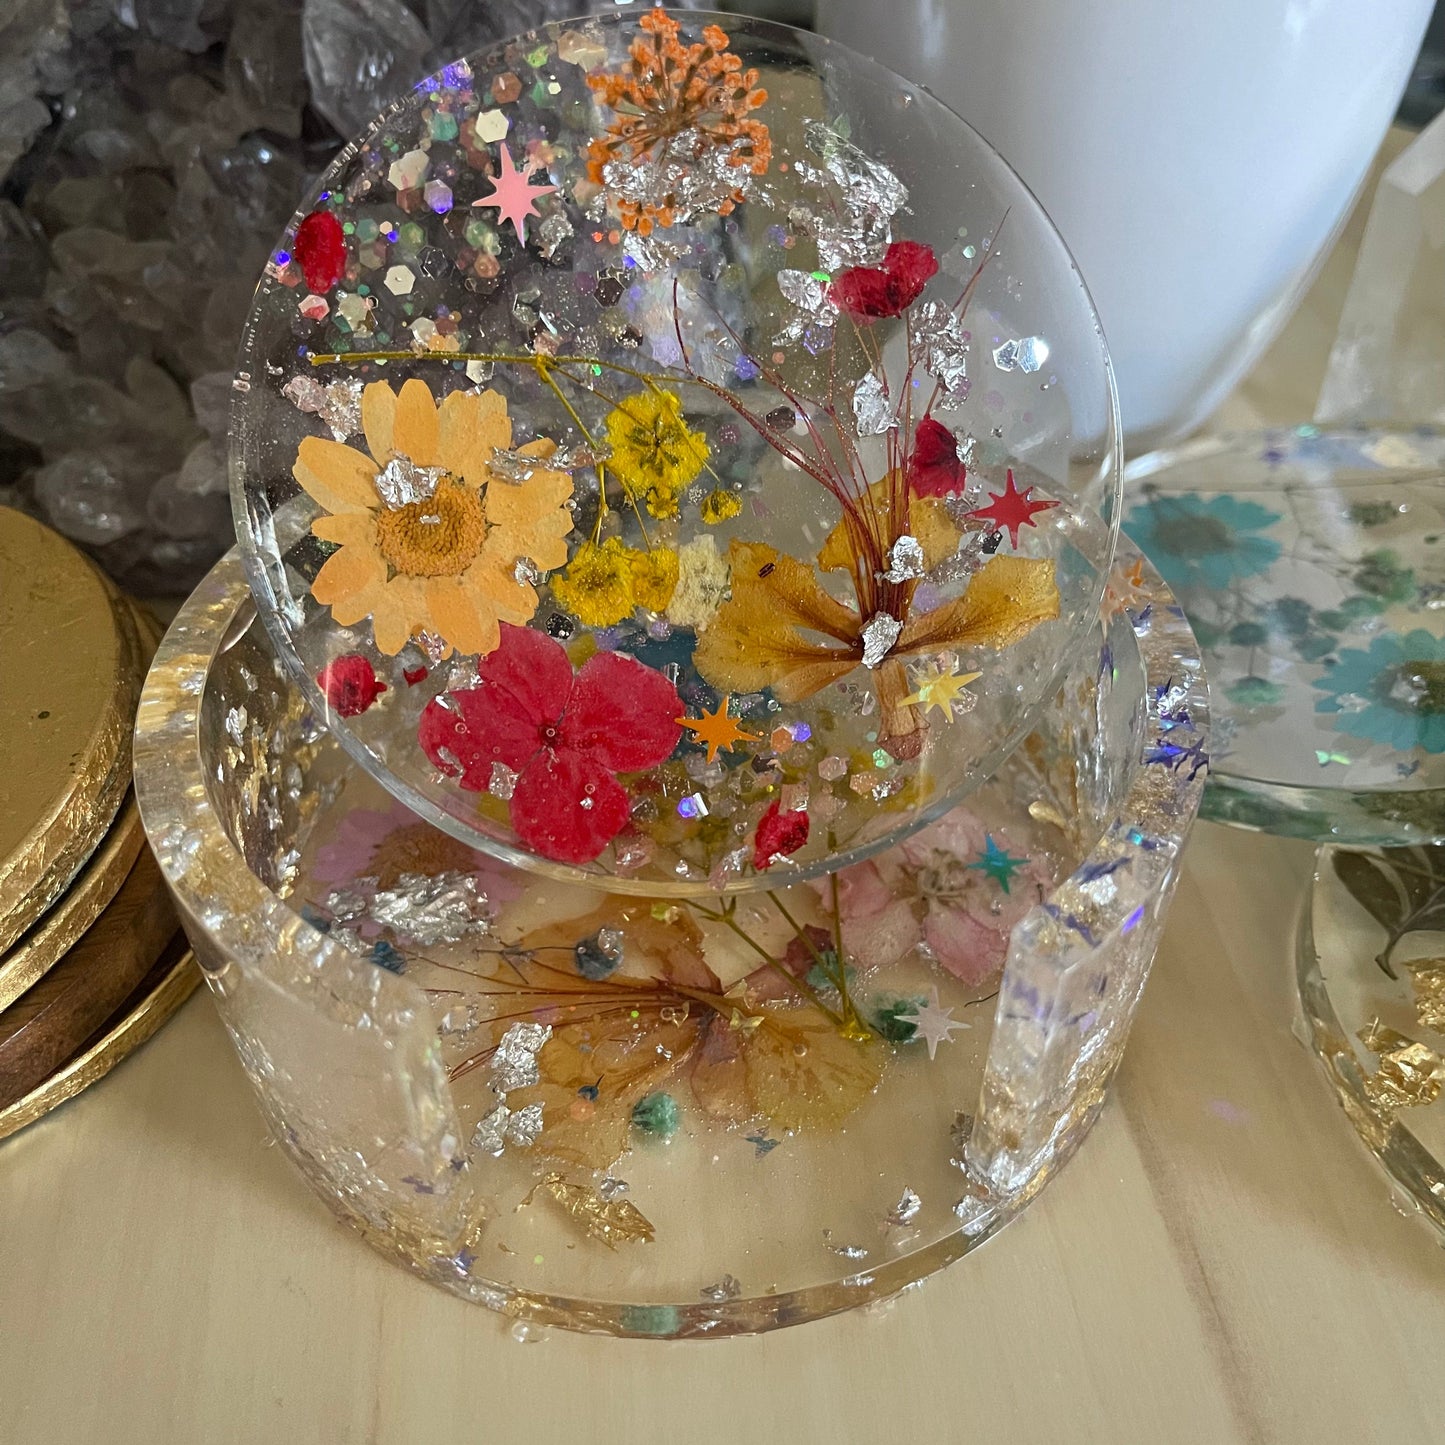 Flower Resin Coaster Class - pressed flowers- Tuesday 4/16 @ 6pm